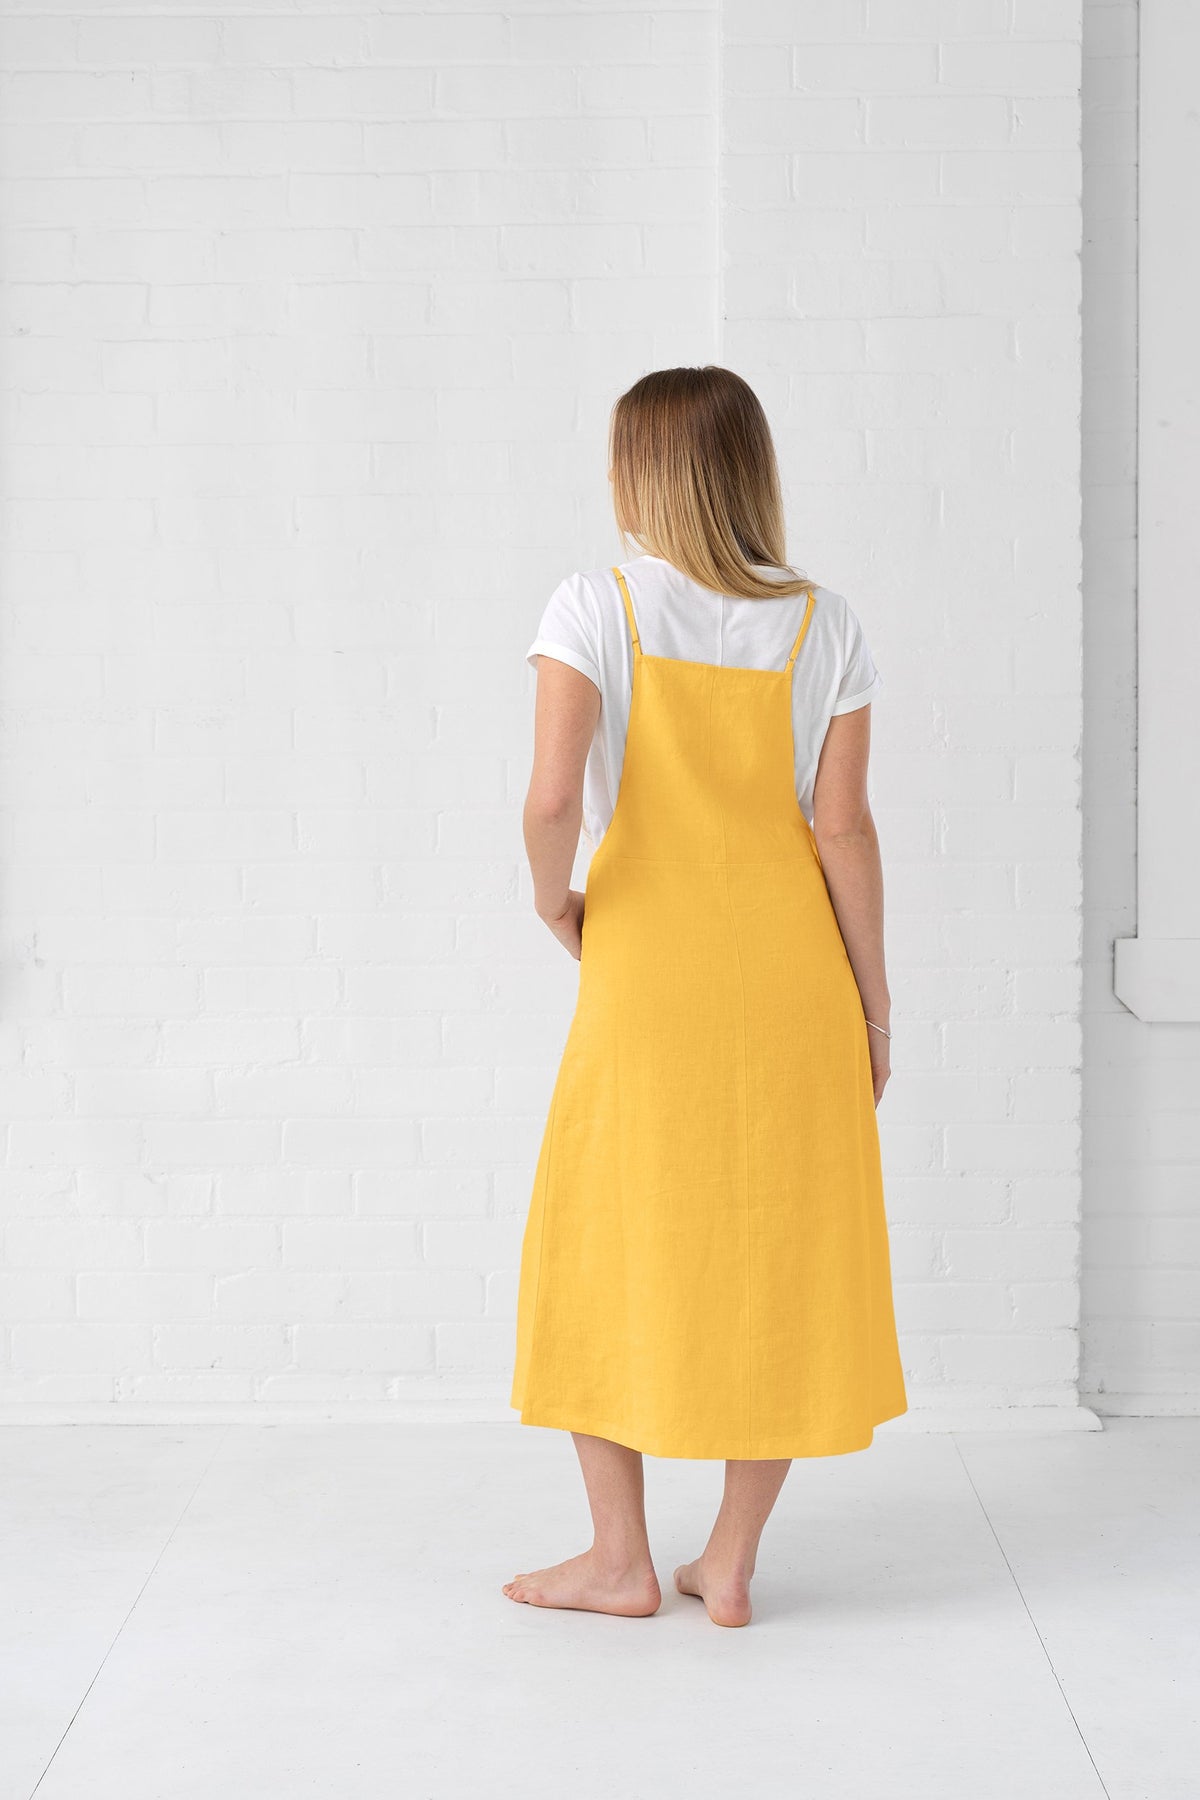 Classic Pinafore - Gold